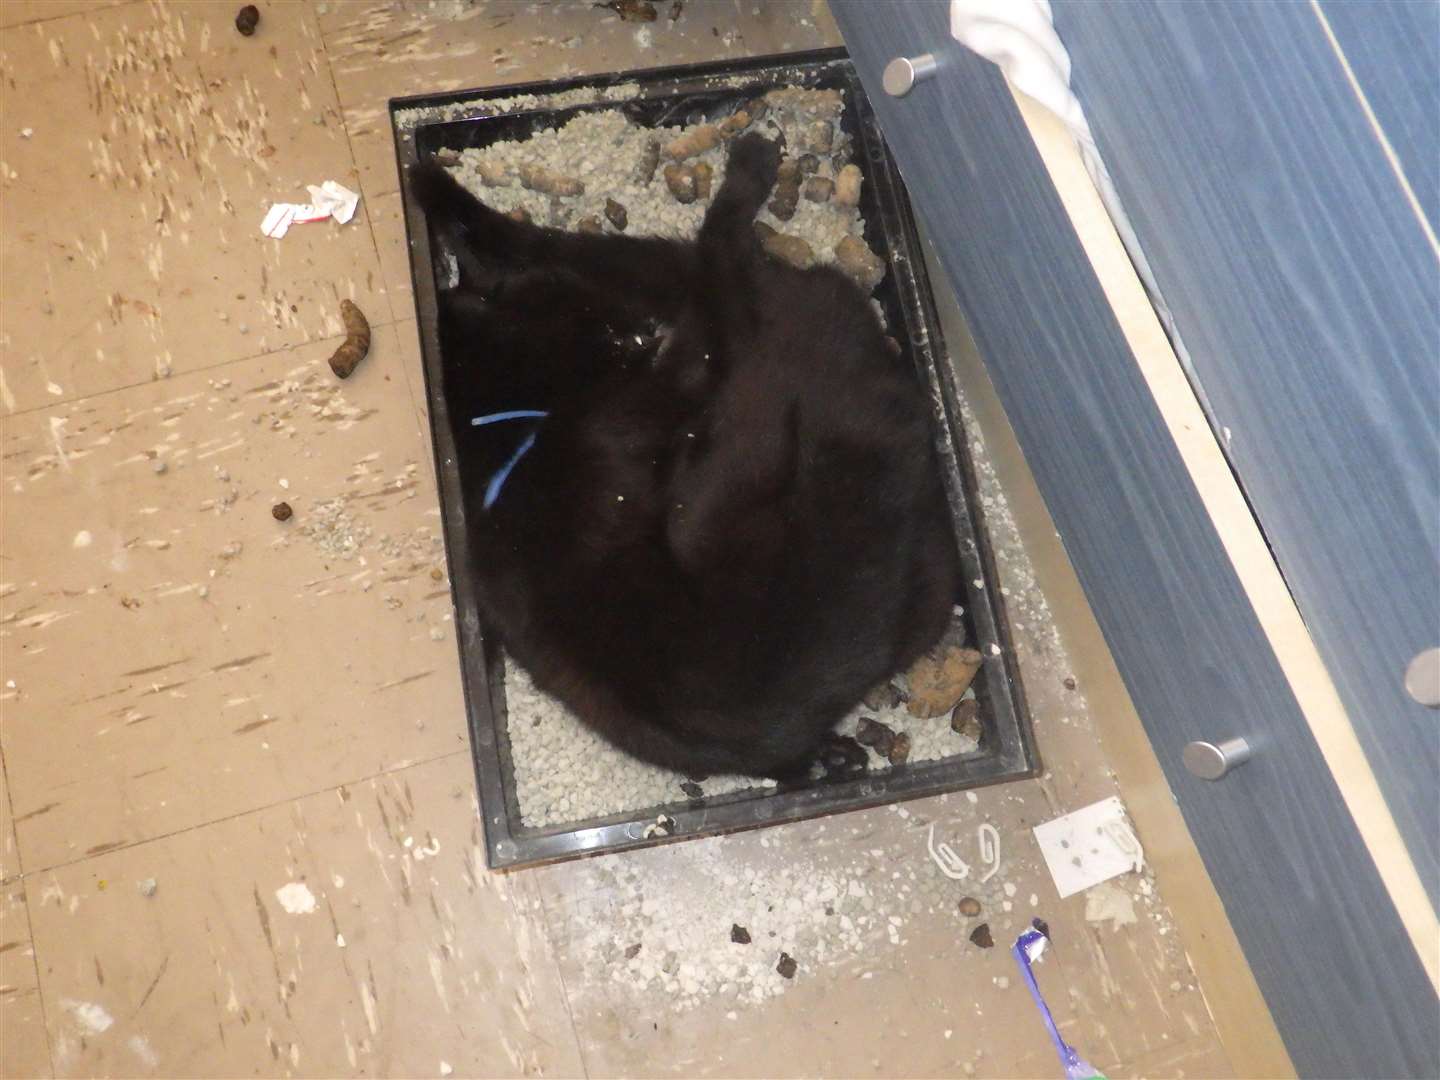 The dead cat in the litter tray. Picture: RSPCA